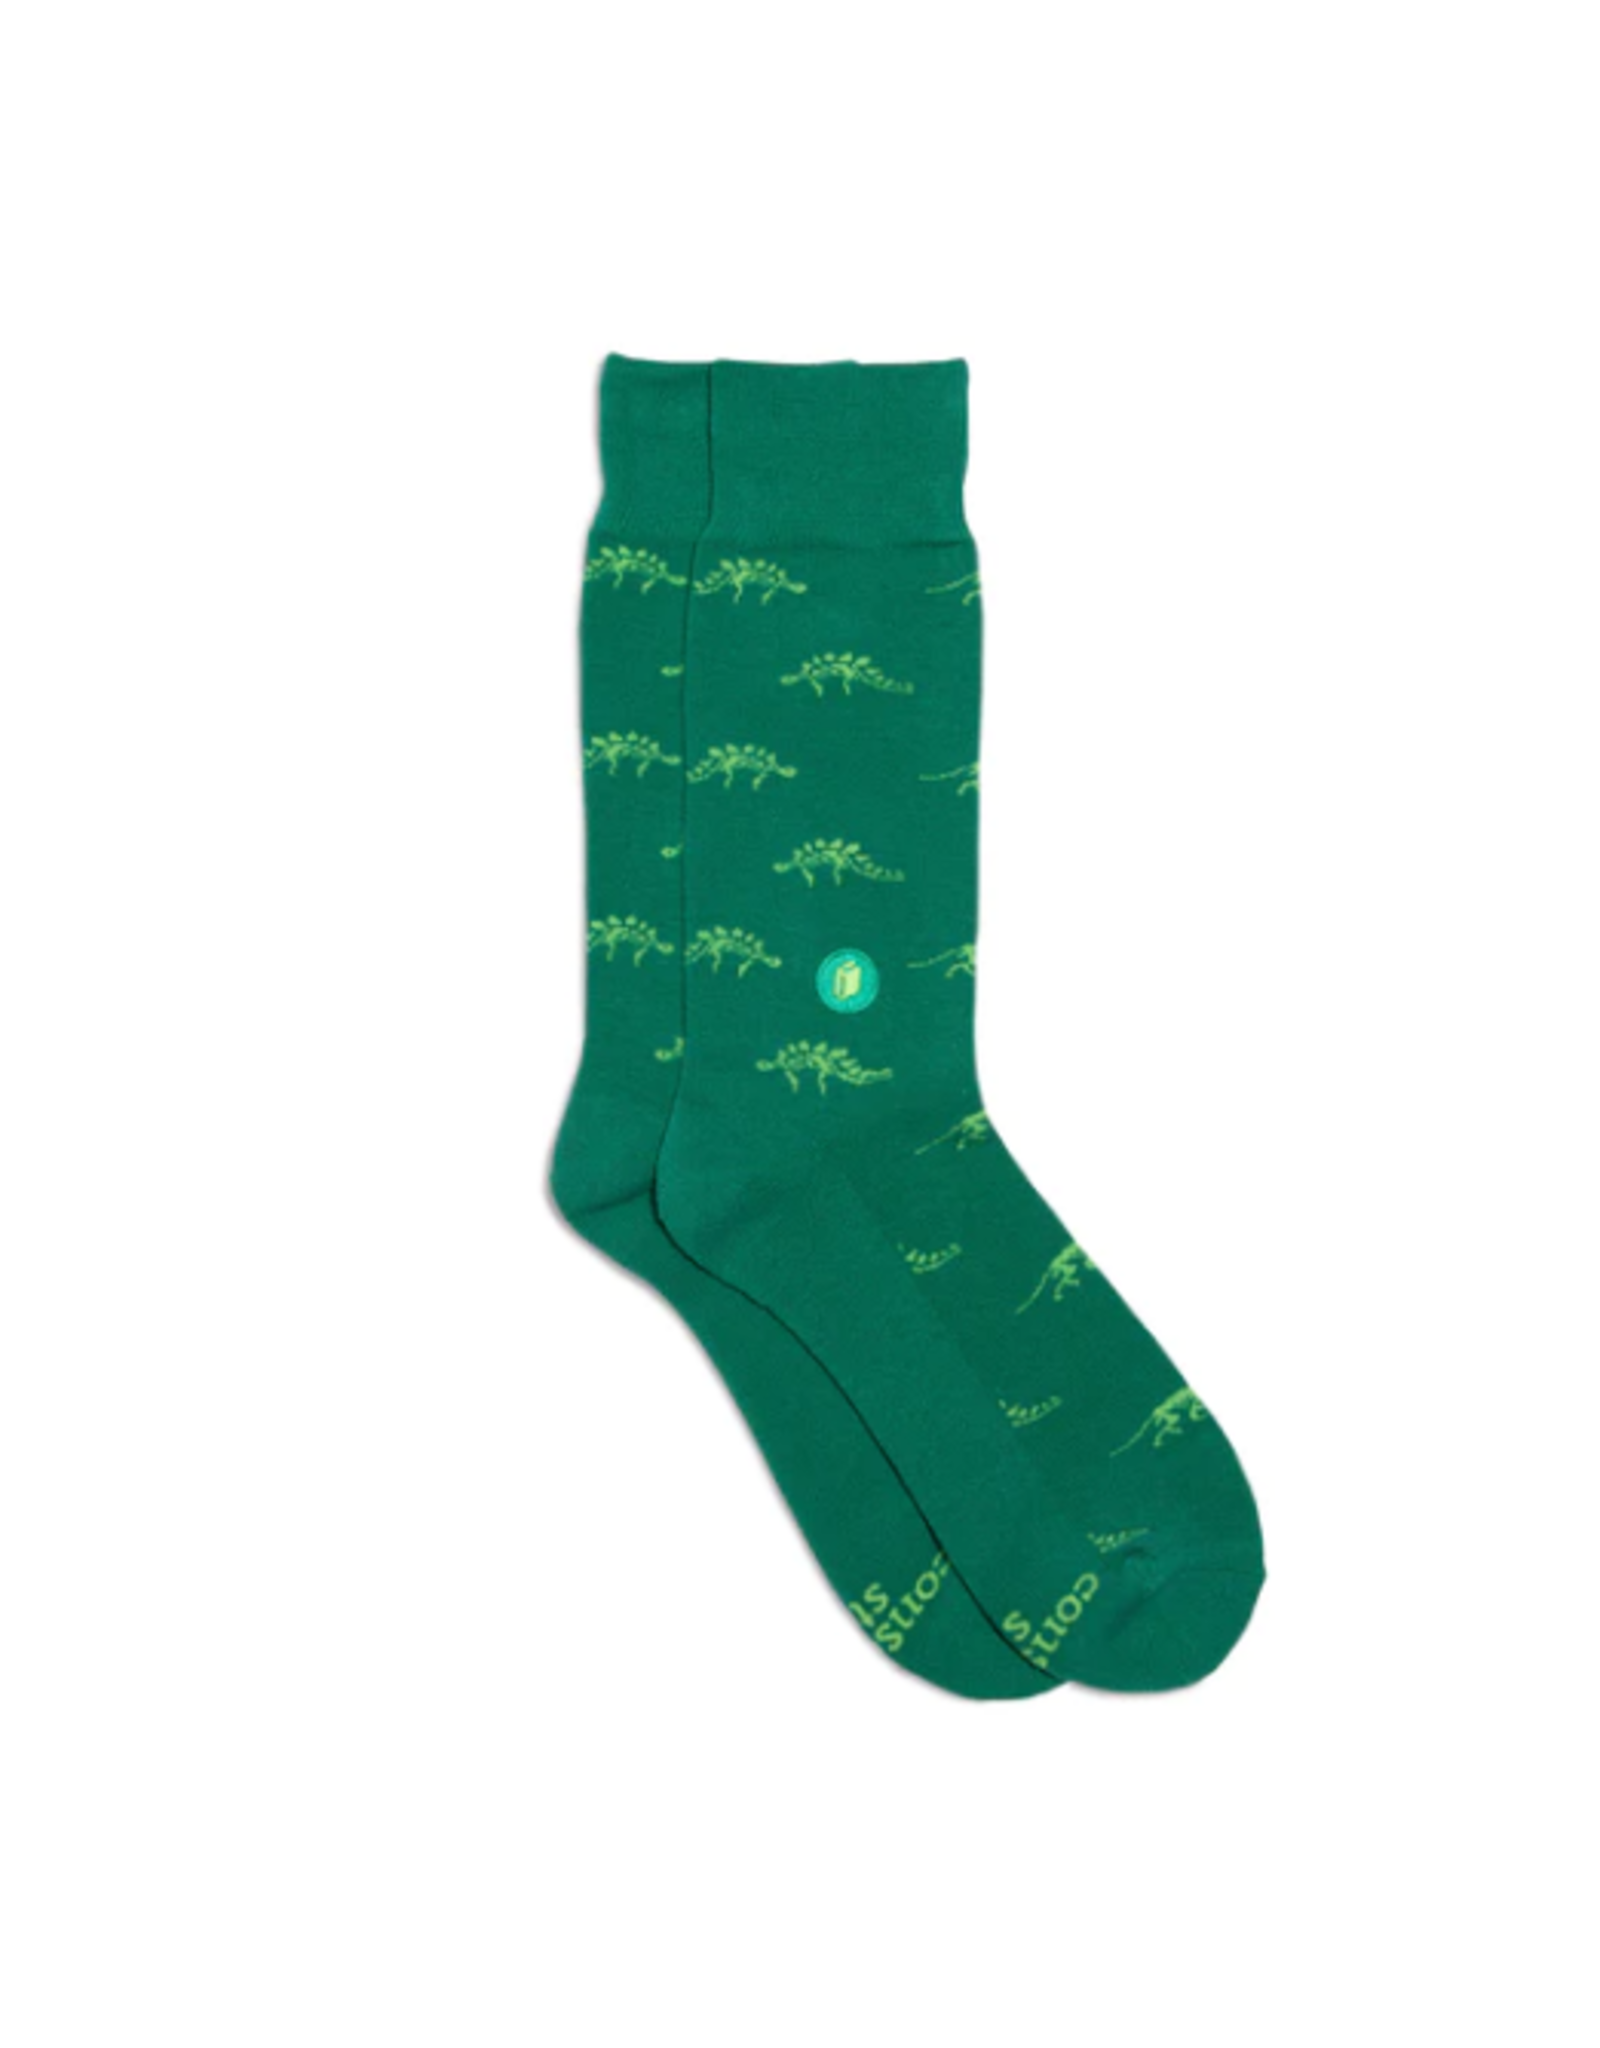 India Crew Socks That Give Books - Green Dinosaurs